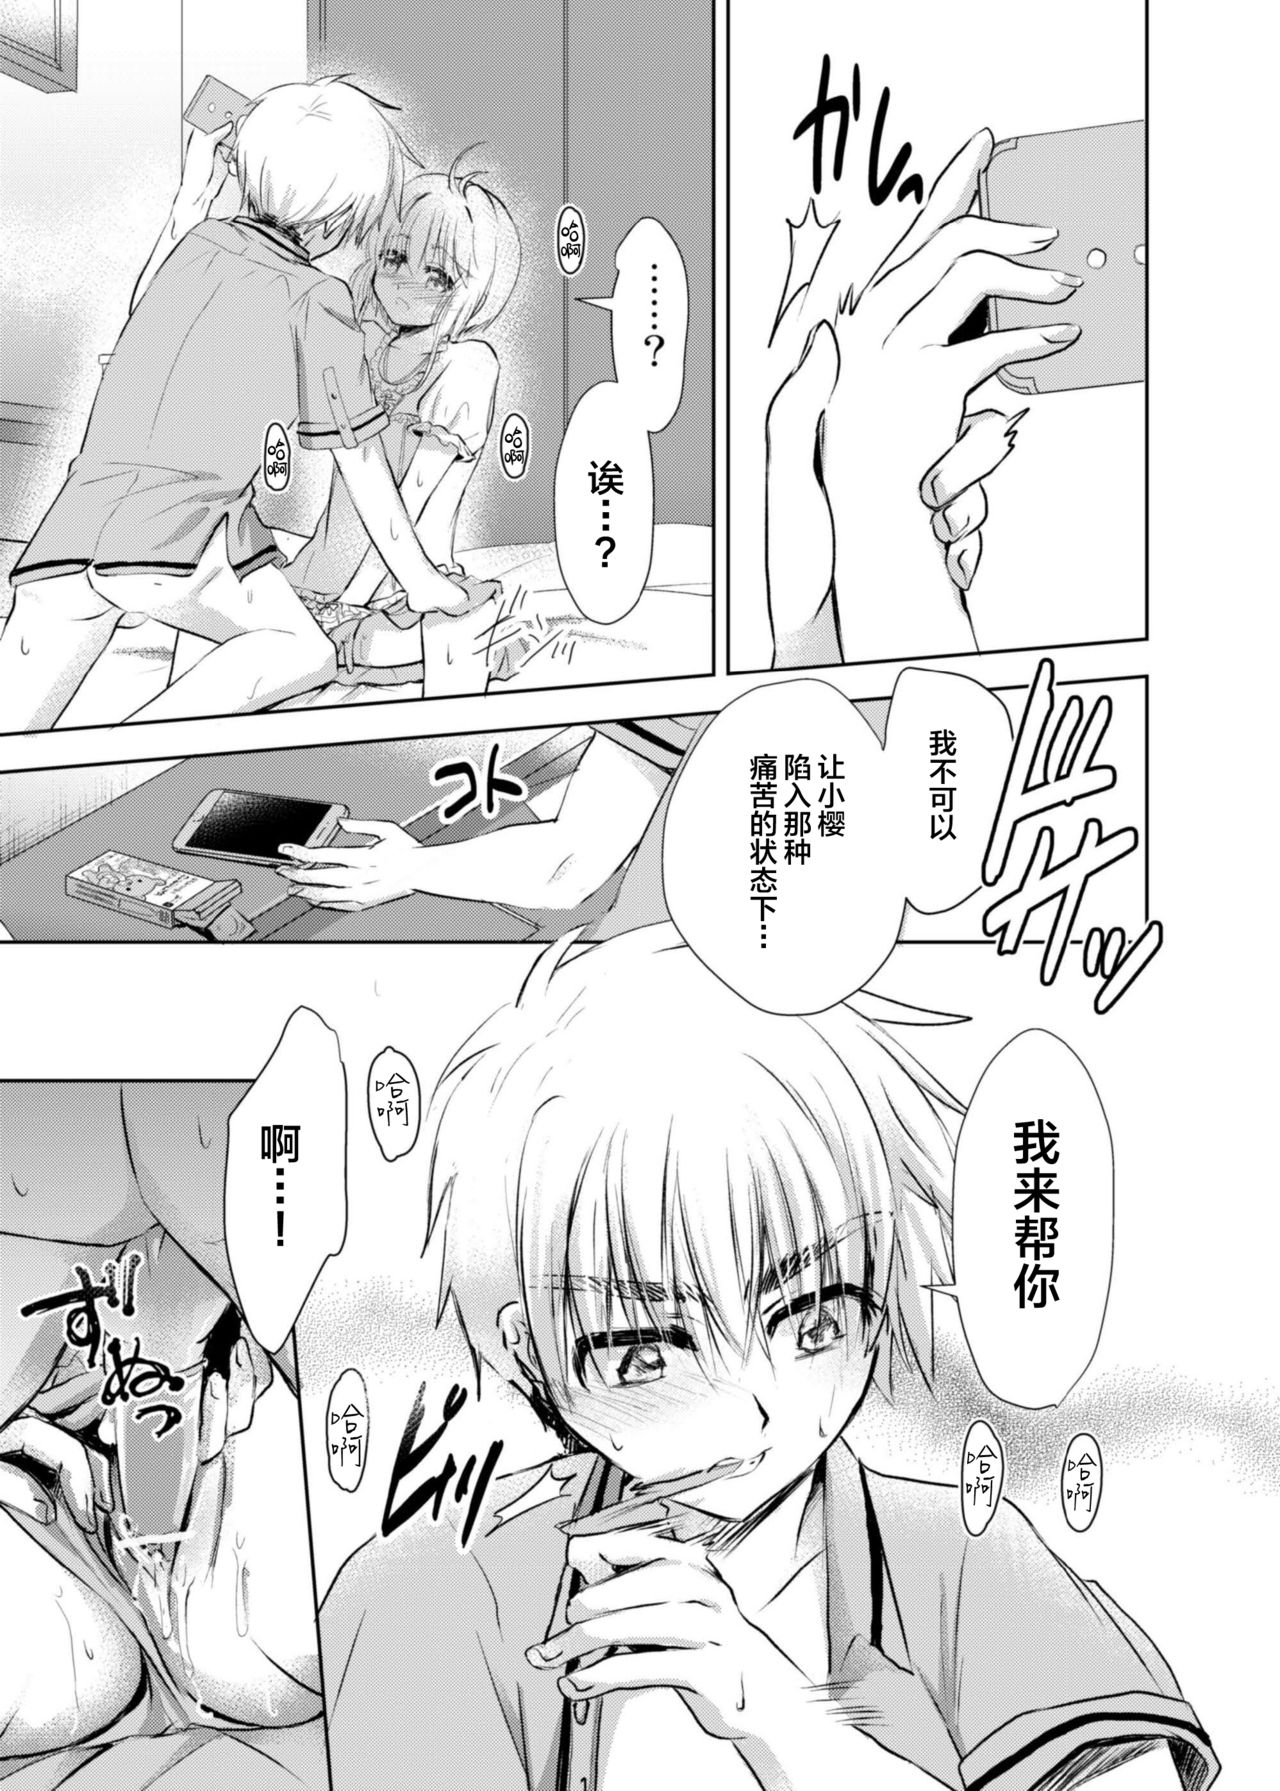 [Maple of Forest (Kaede Sago)] Give and Take (Cardcaptor Sakura) [Chinese] [新桥月白日语社] [Digital] page 24 full